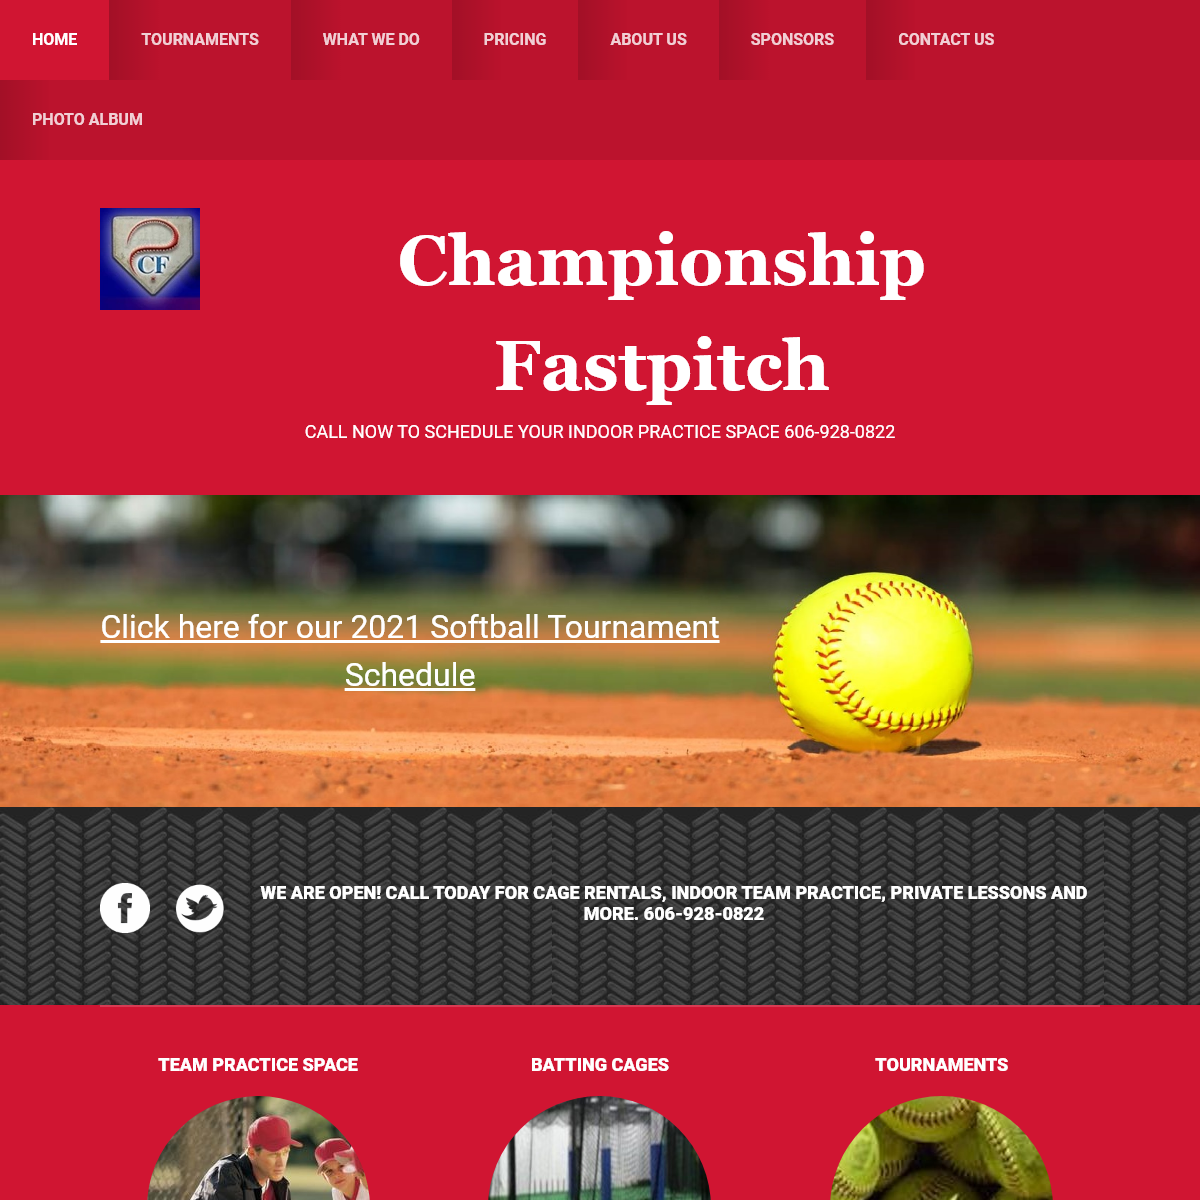 A complete backup of cfastpitch.com